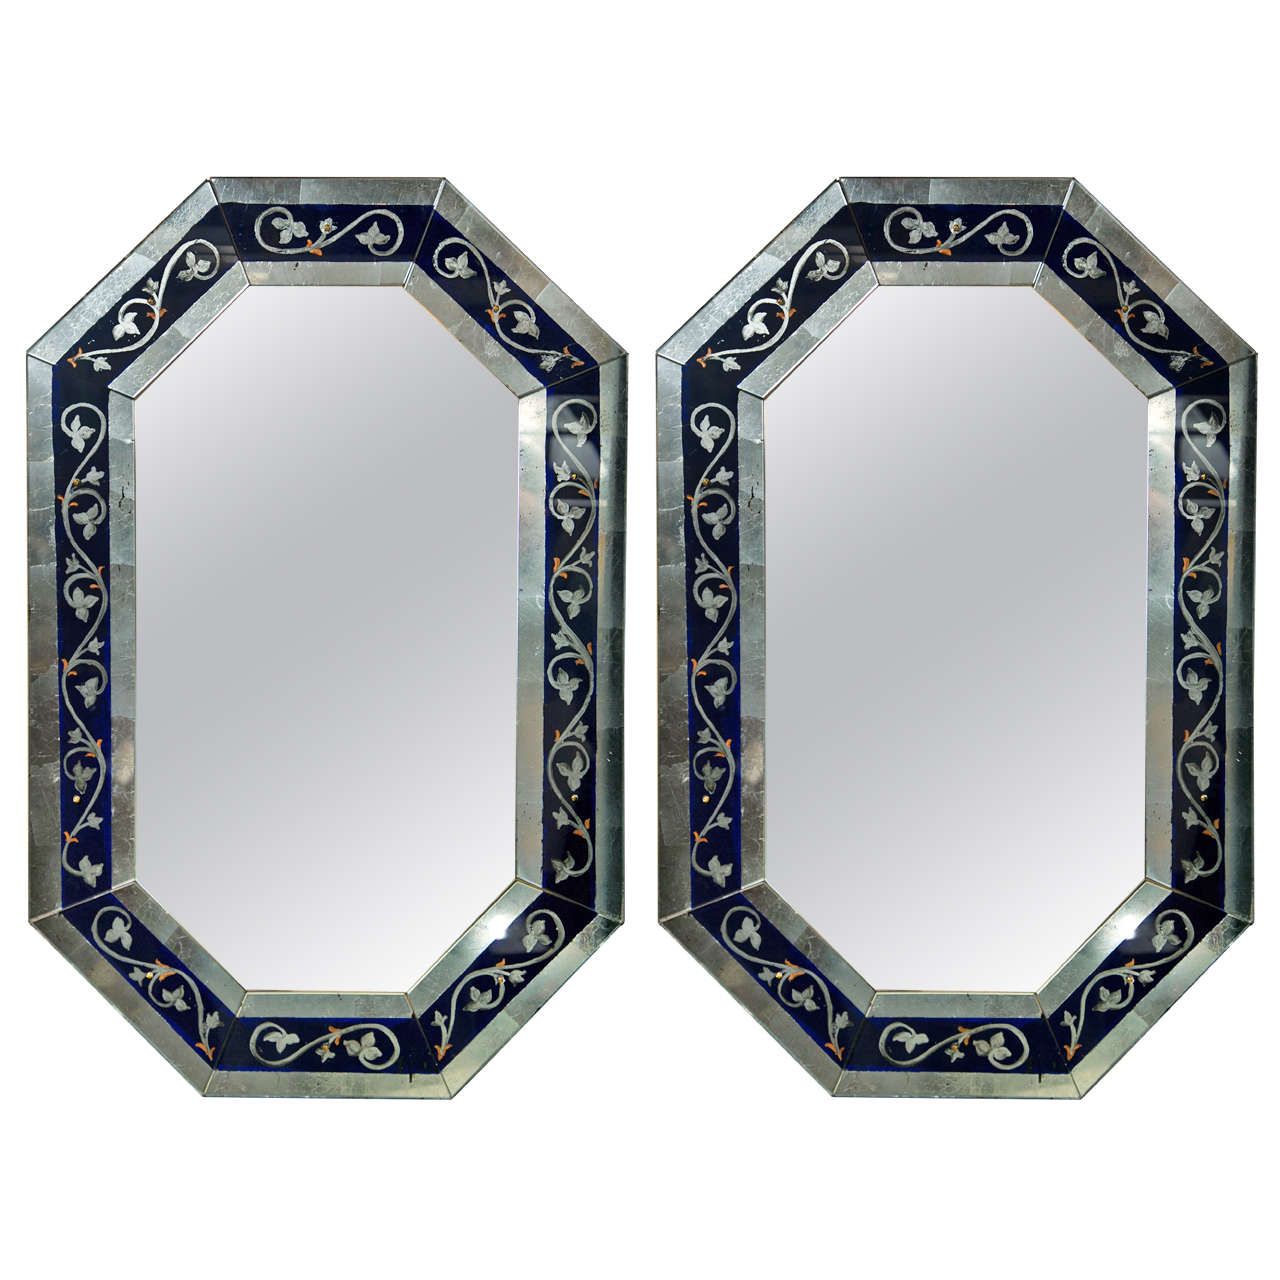 Pair Of Octagonal Silver Leaf Mirrors At 1stdibs Pertaining To Metallic Gold Leaf Wall Mirrors (View 4 of 15)